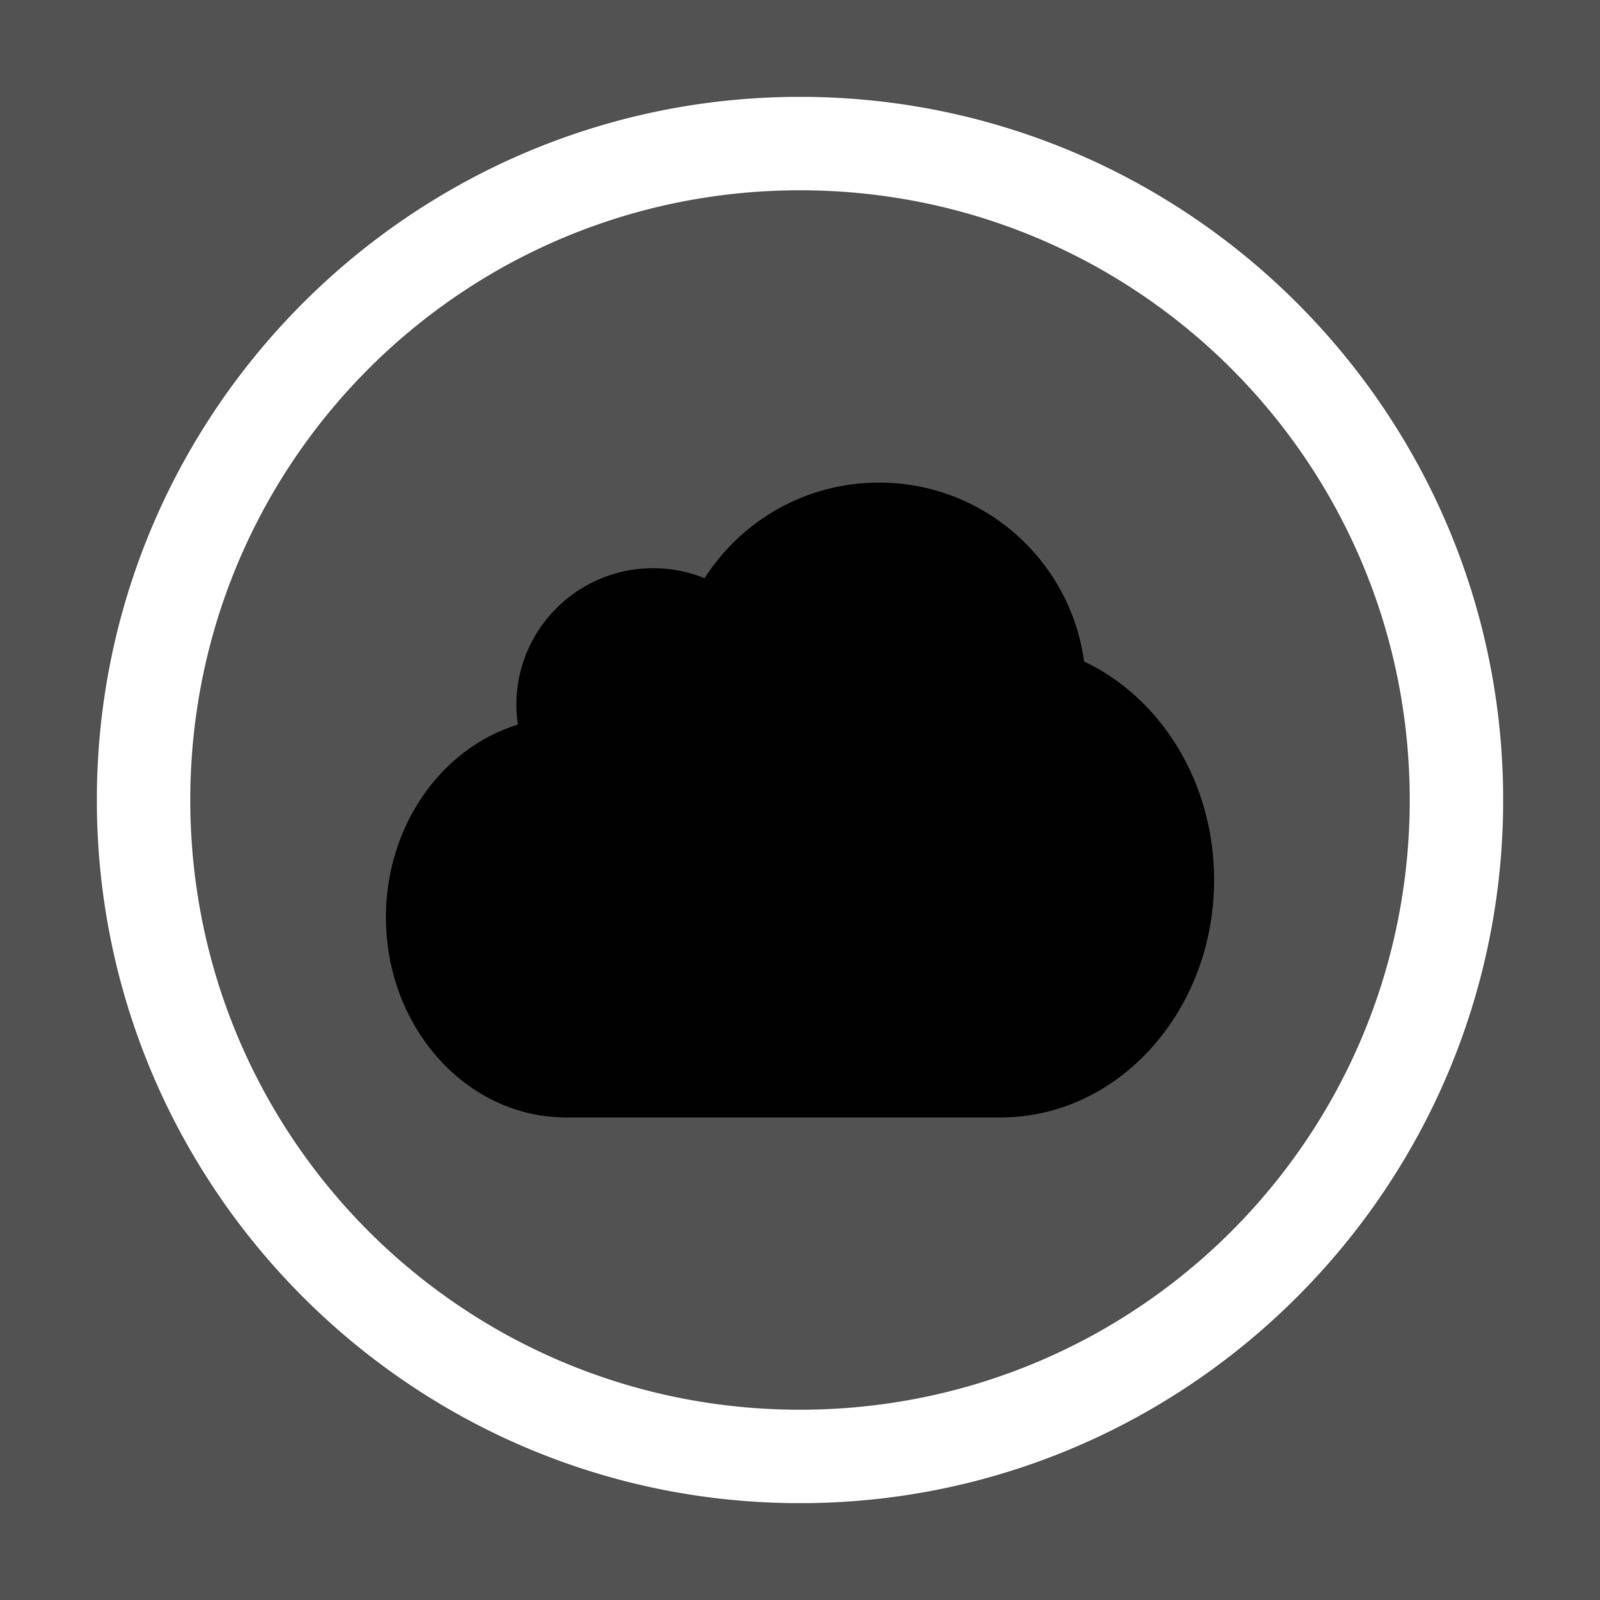 Cloud vector icon. This rounded flat symbol is drawn with black and white colors on a gray background.